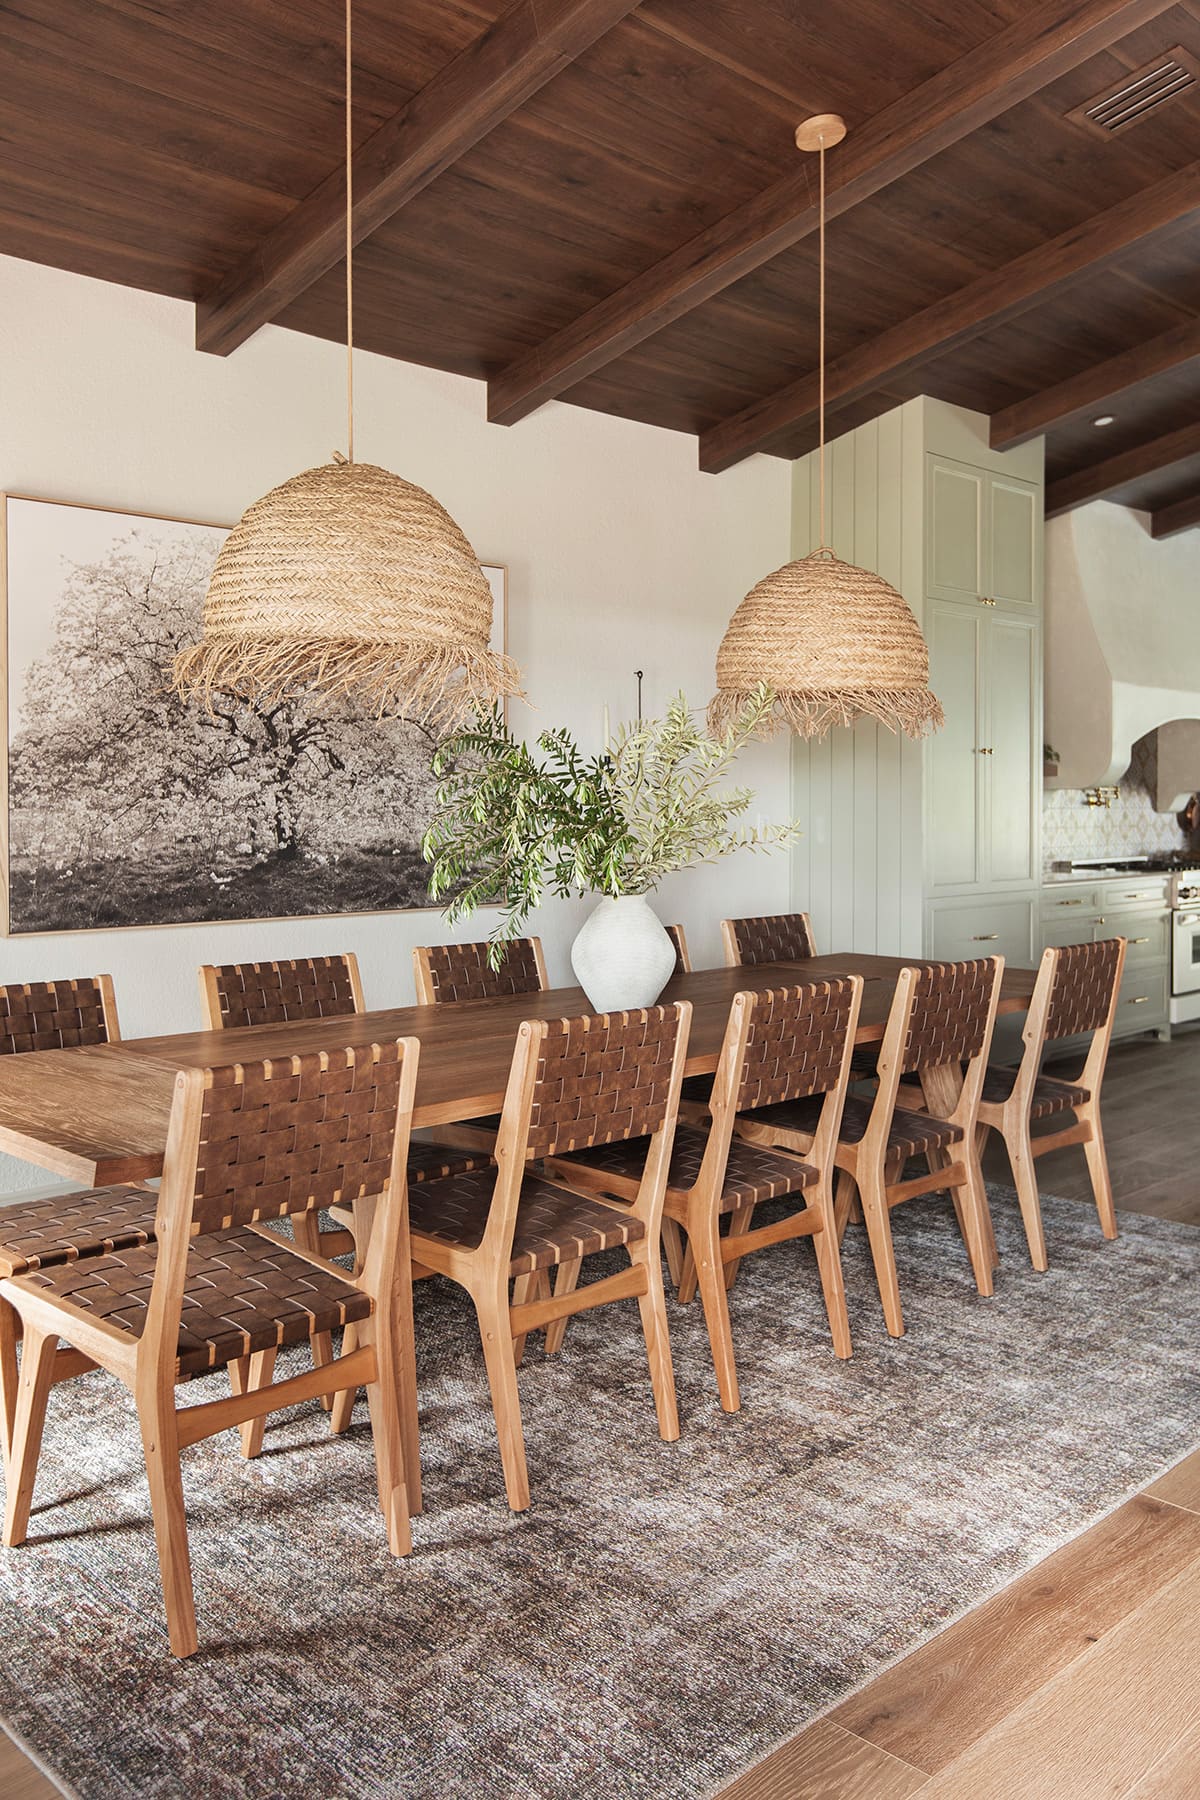 mediterranean style dining room with wood and leather chairs, seagrass pendant lights